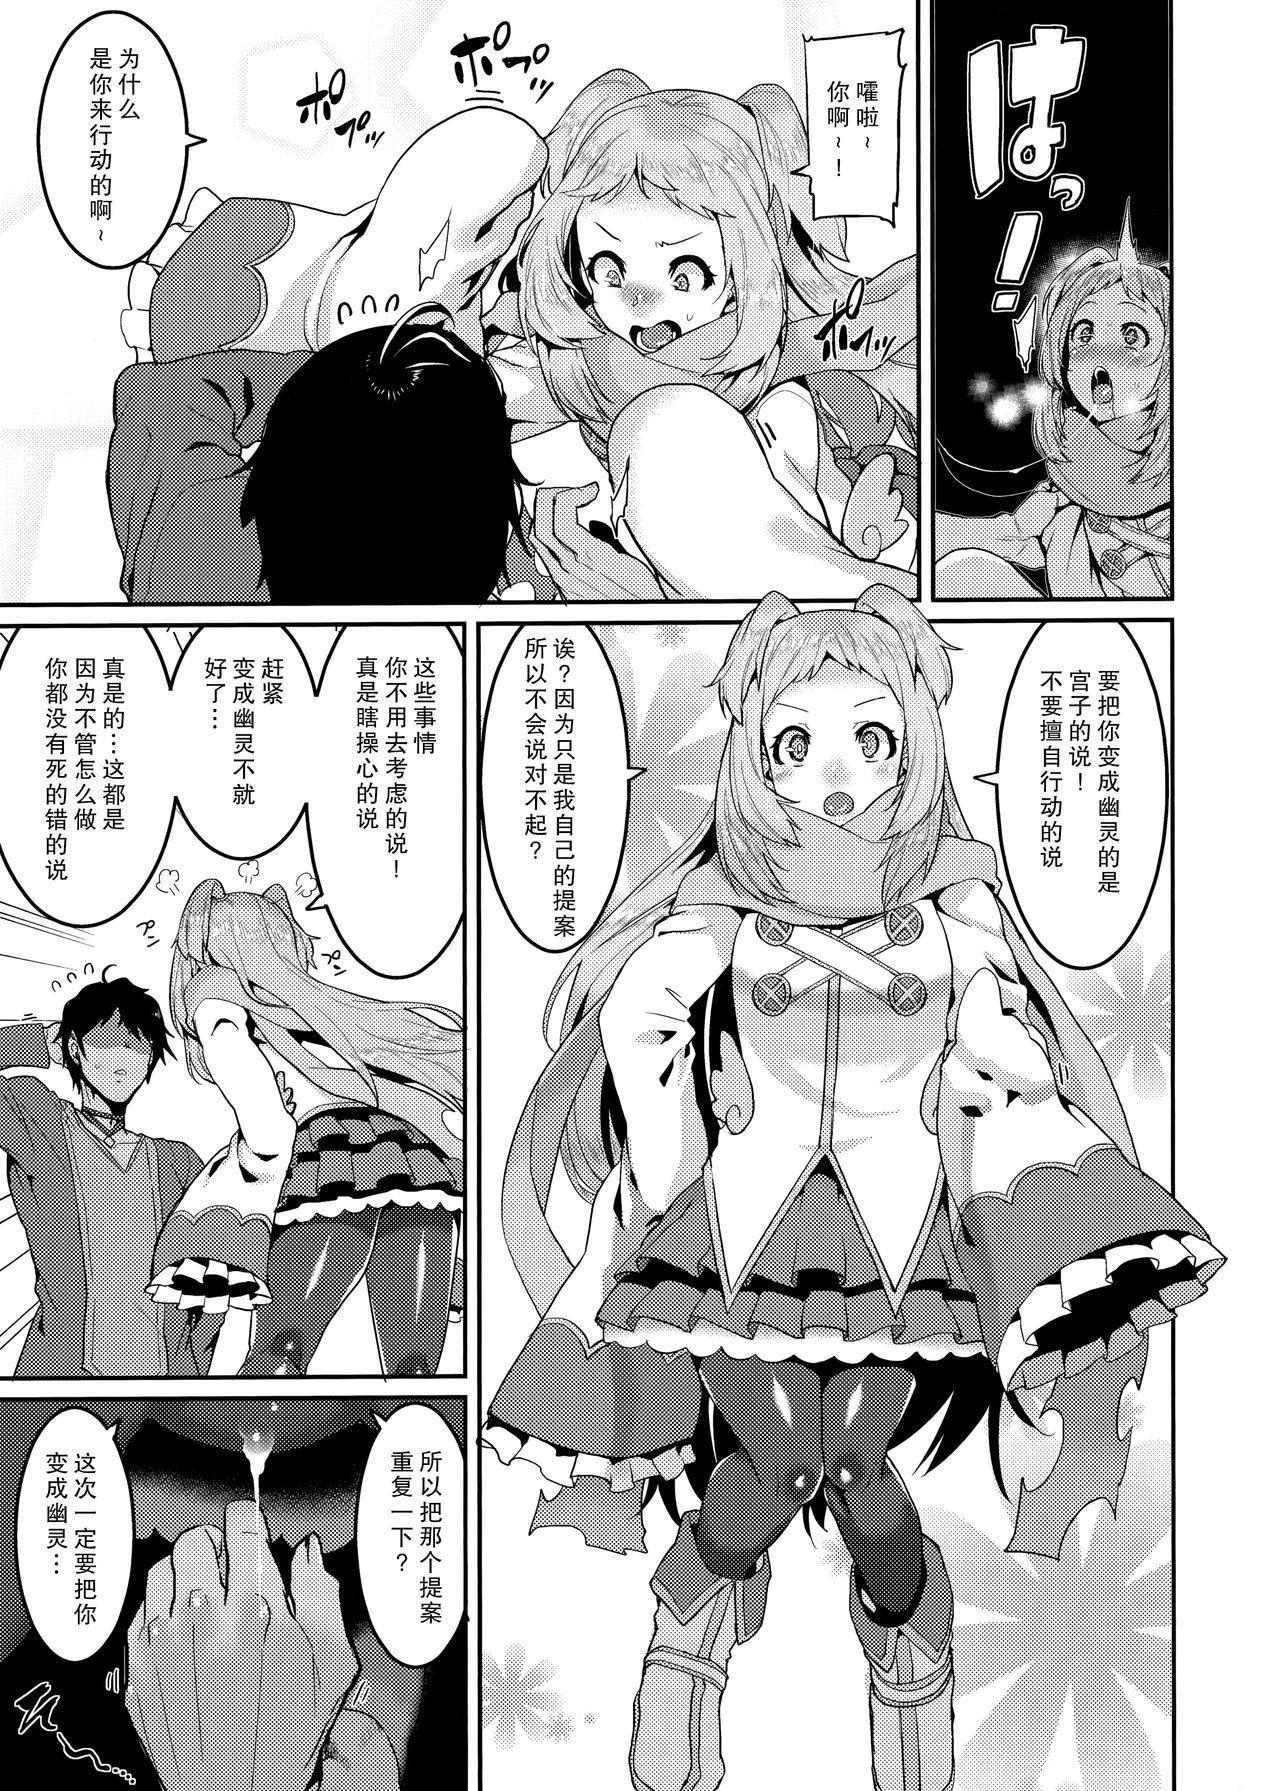 Women Sucking (C96) [HBO (Henkuma)] Pudding Switch (Princess Connect! Re:Dive) [Chinese] 【零食汉化组】 - Princess connect Anal Gape - Page 8